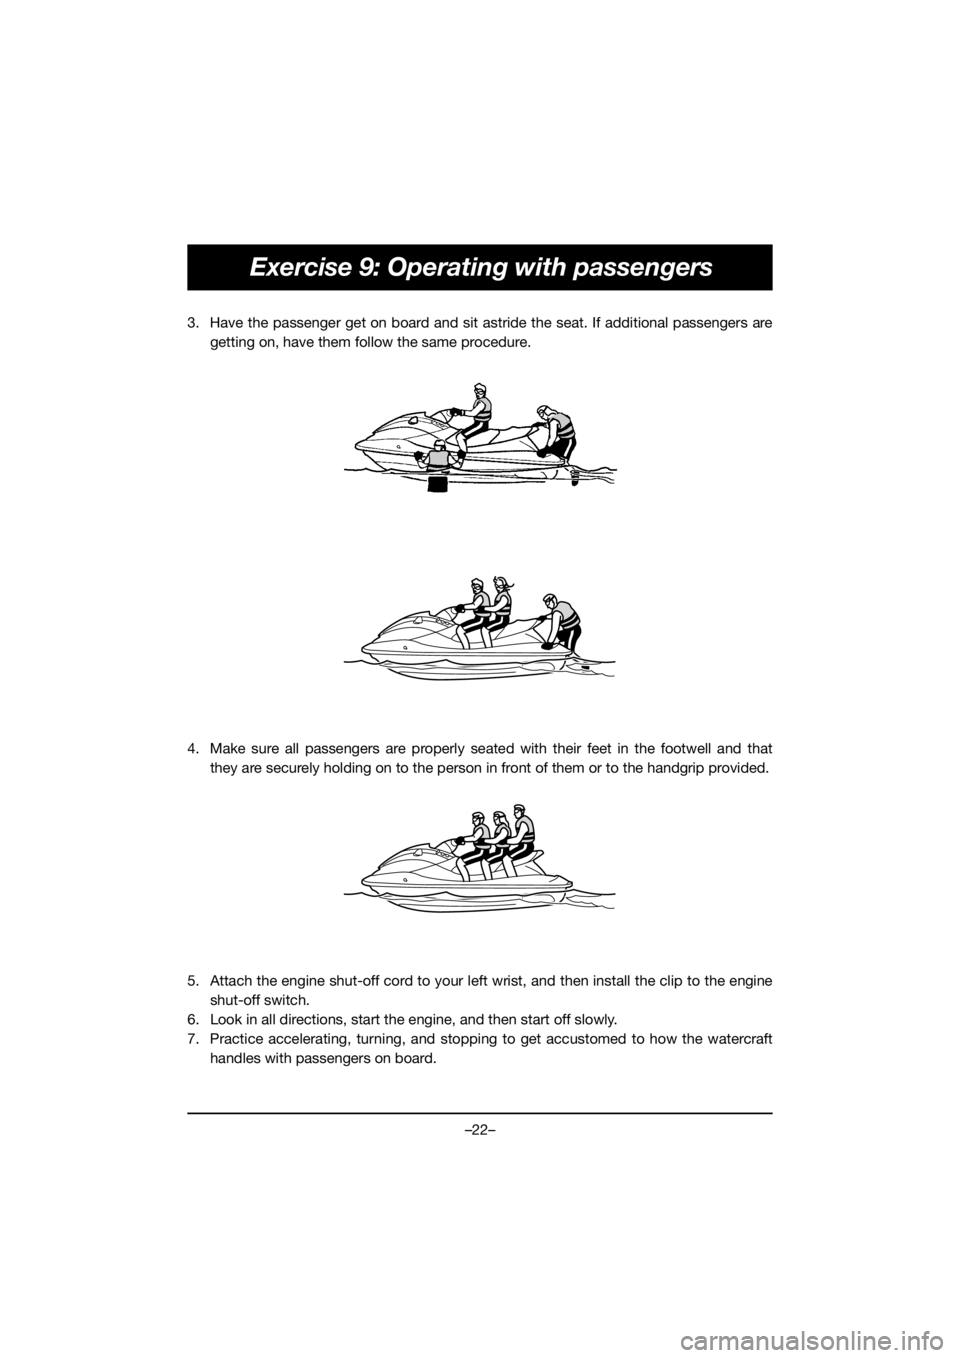 YAMAHA EXR 2020  Betriebsanleitungen (in German) –22–
Exercise 9: Operating with passengers
3. Have the passenger get on board and sit astride the seat. If additional passengers are
getting on, have them follow the same procedure. 
4. Make sure 